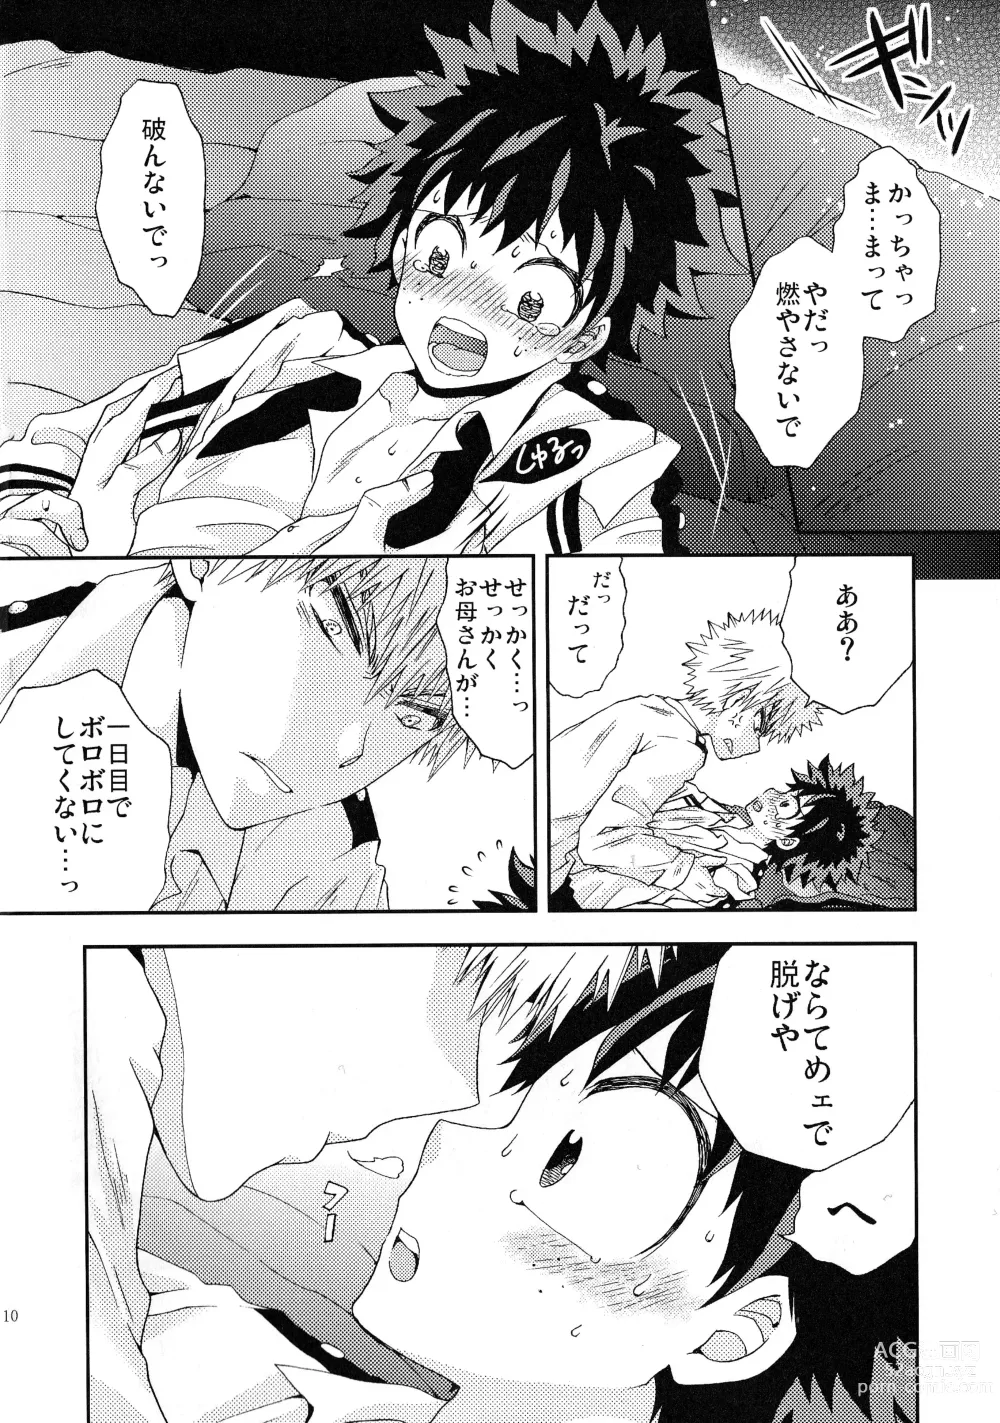 Page 9 of doujinshi The Four Seasons ~KD R18 Anthology~